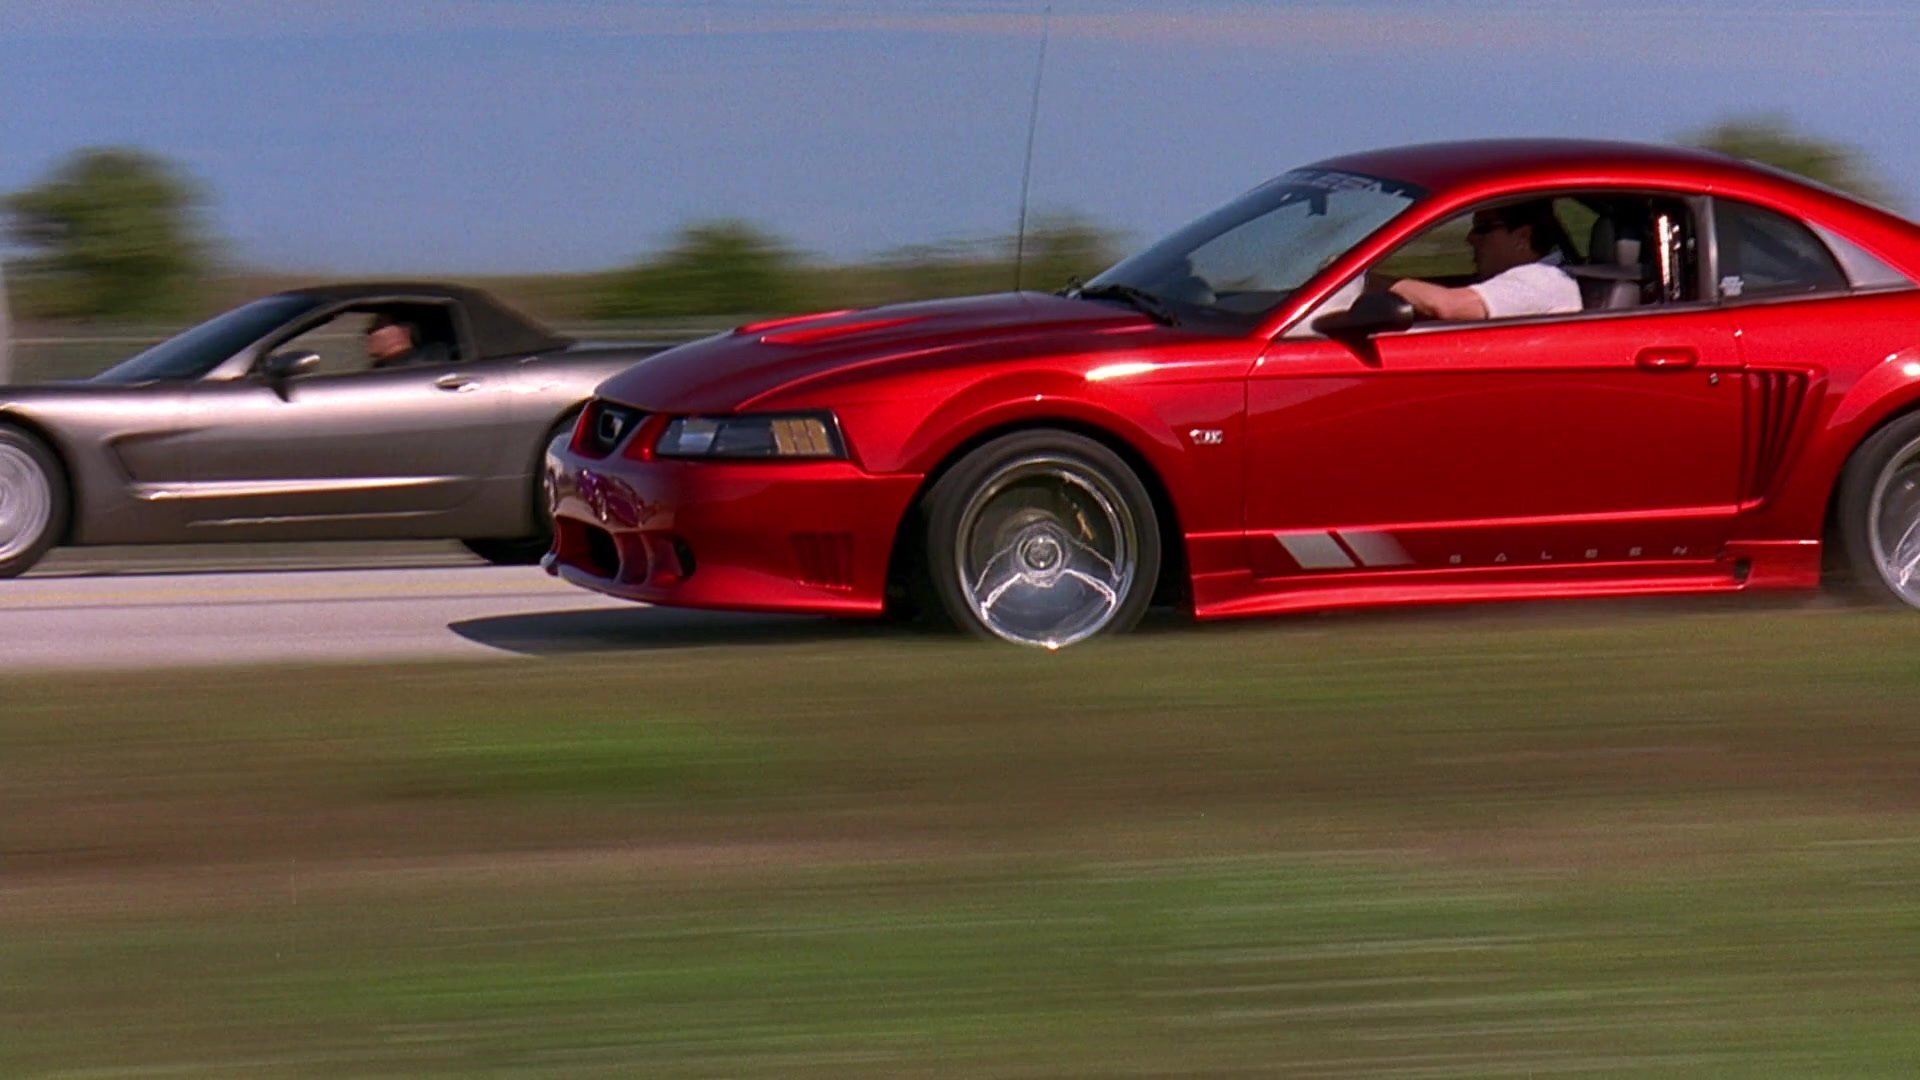 2 fast 2 furious mustang